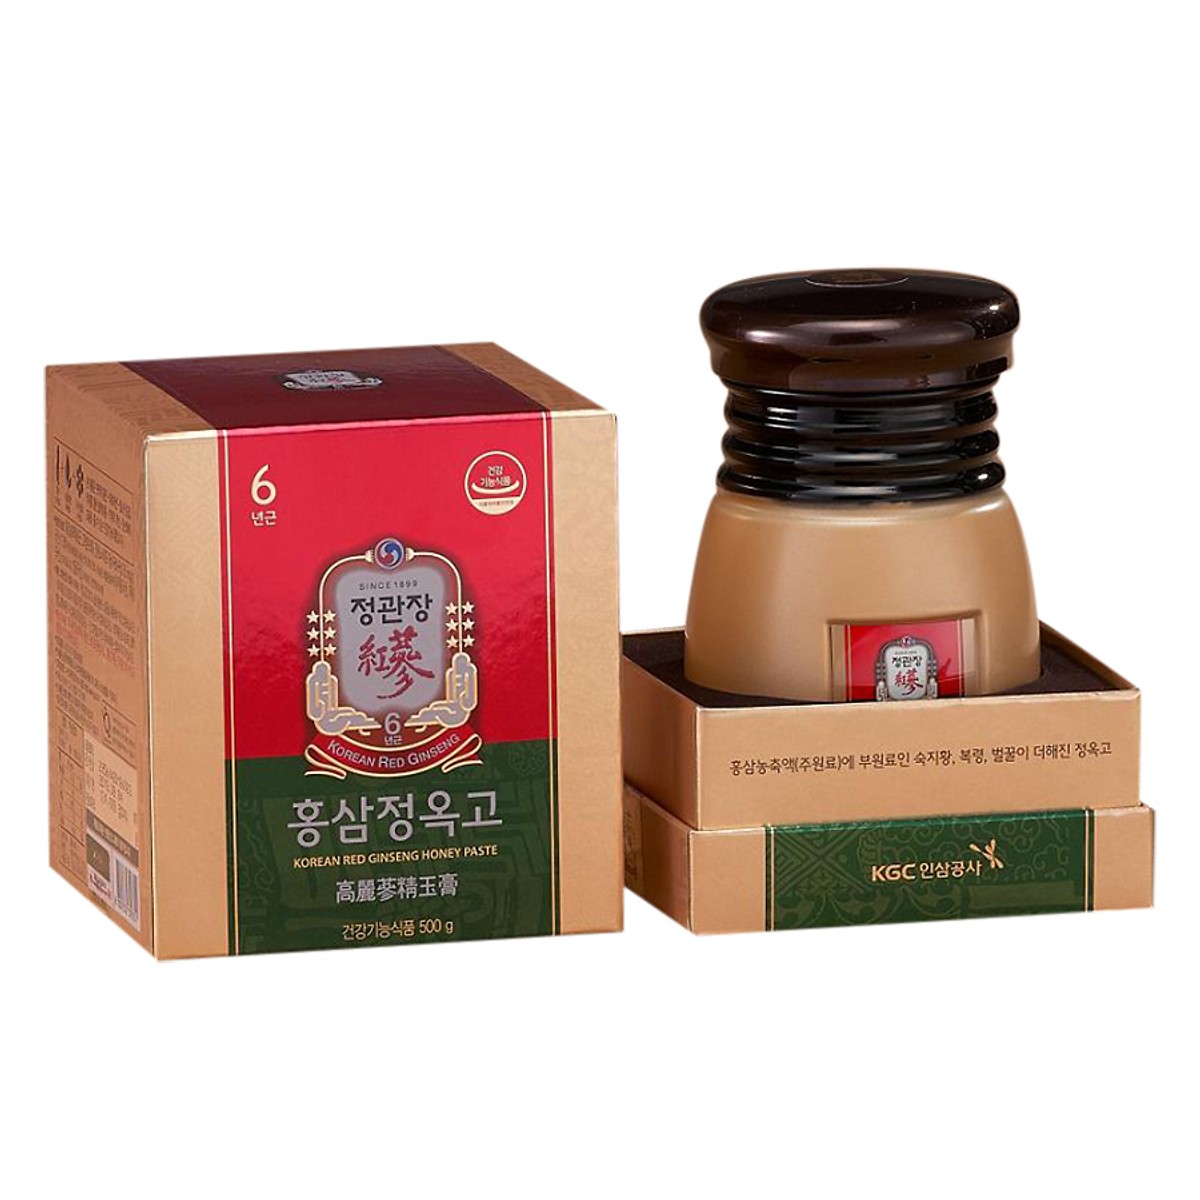 Tinh Chất Hồng Sâm Mật Ong KRG Extract with Honey Paste 500g